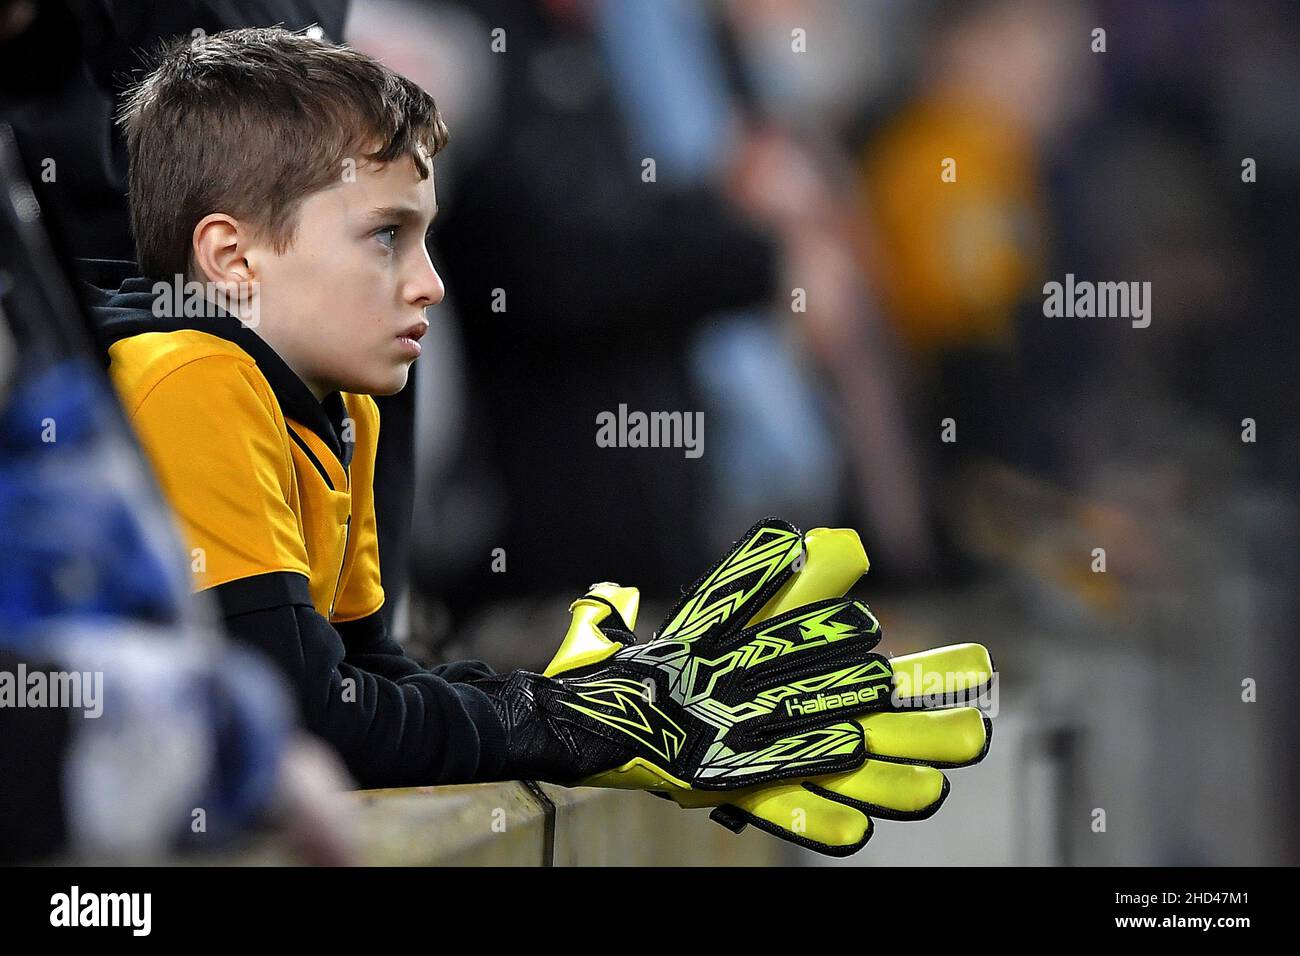 A young Wolverhampton Wanderers fan is seen wearing large goalkeepers gloves - Brighton & Hove Albion v Wolverhampton Wanderers, Premier League, Amex Stadium, Brighton, UK - 15th December 2021  Editorial Use Only - DataCo restrictions apply Stock Photo